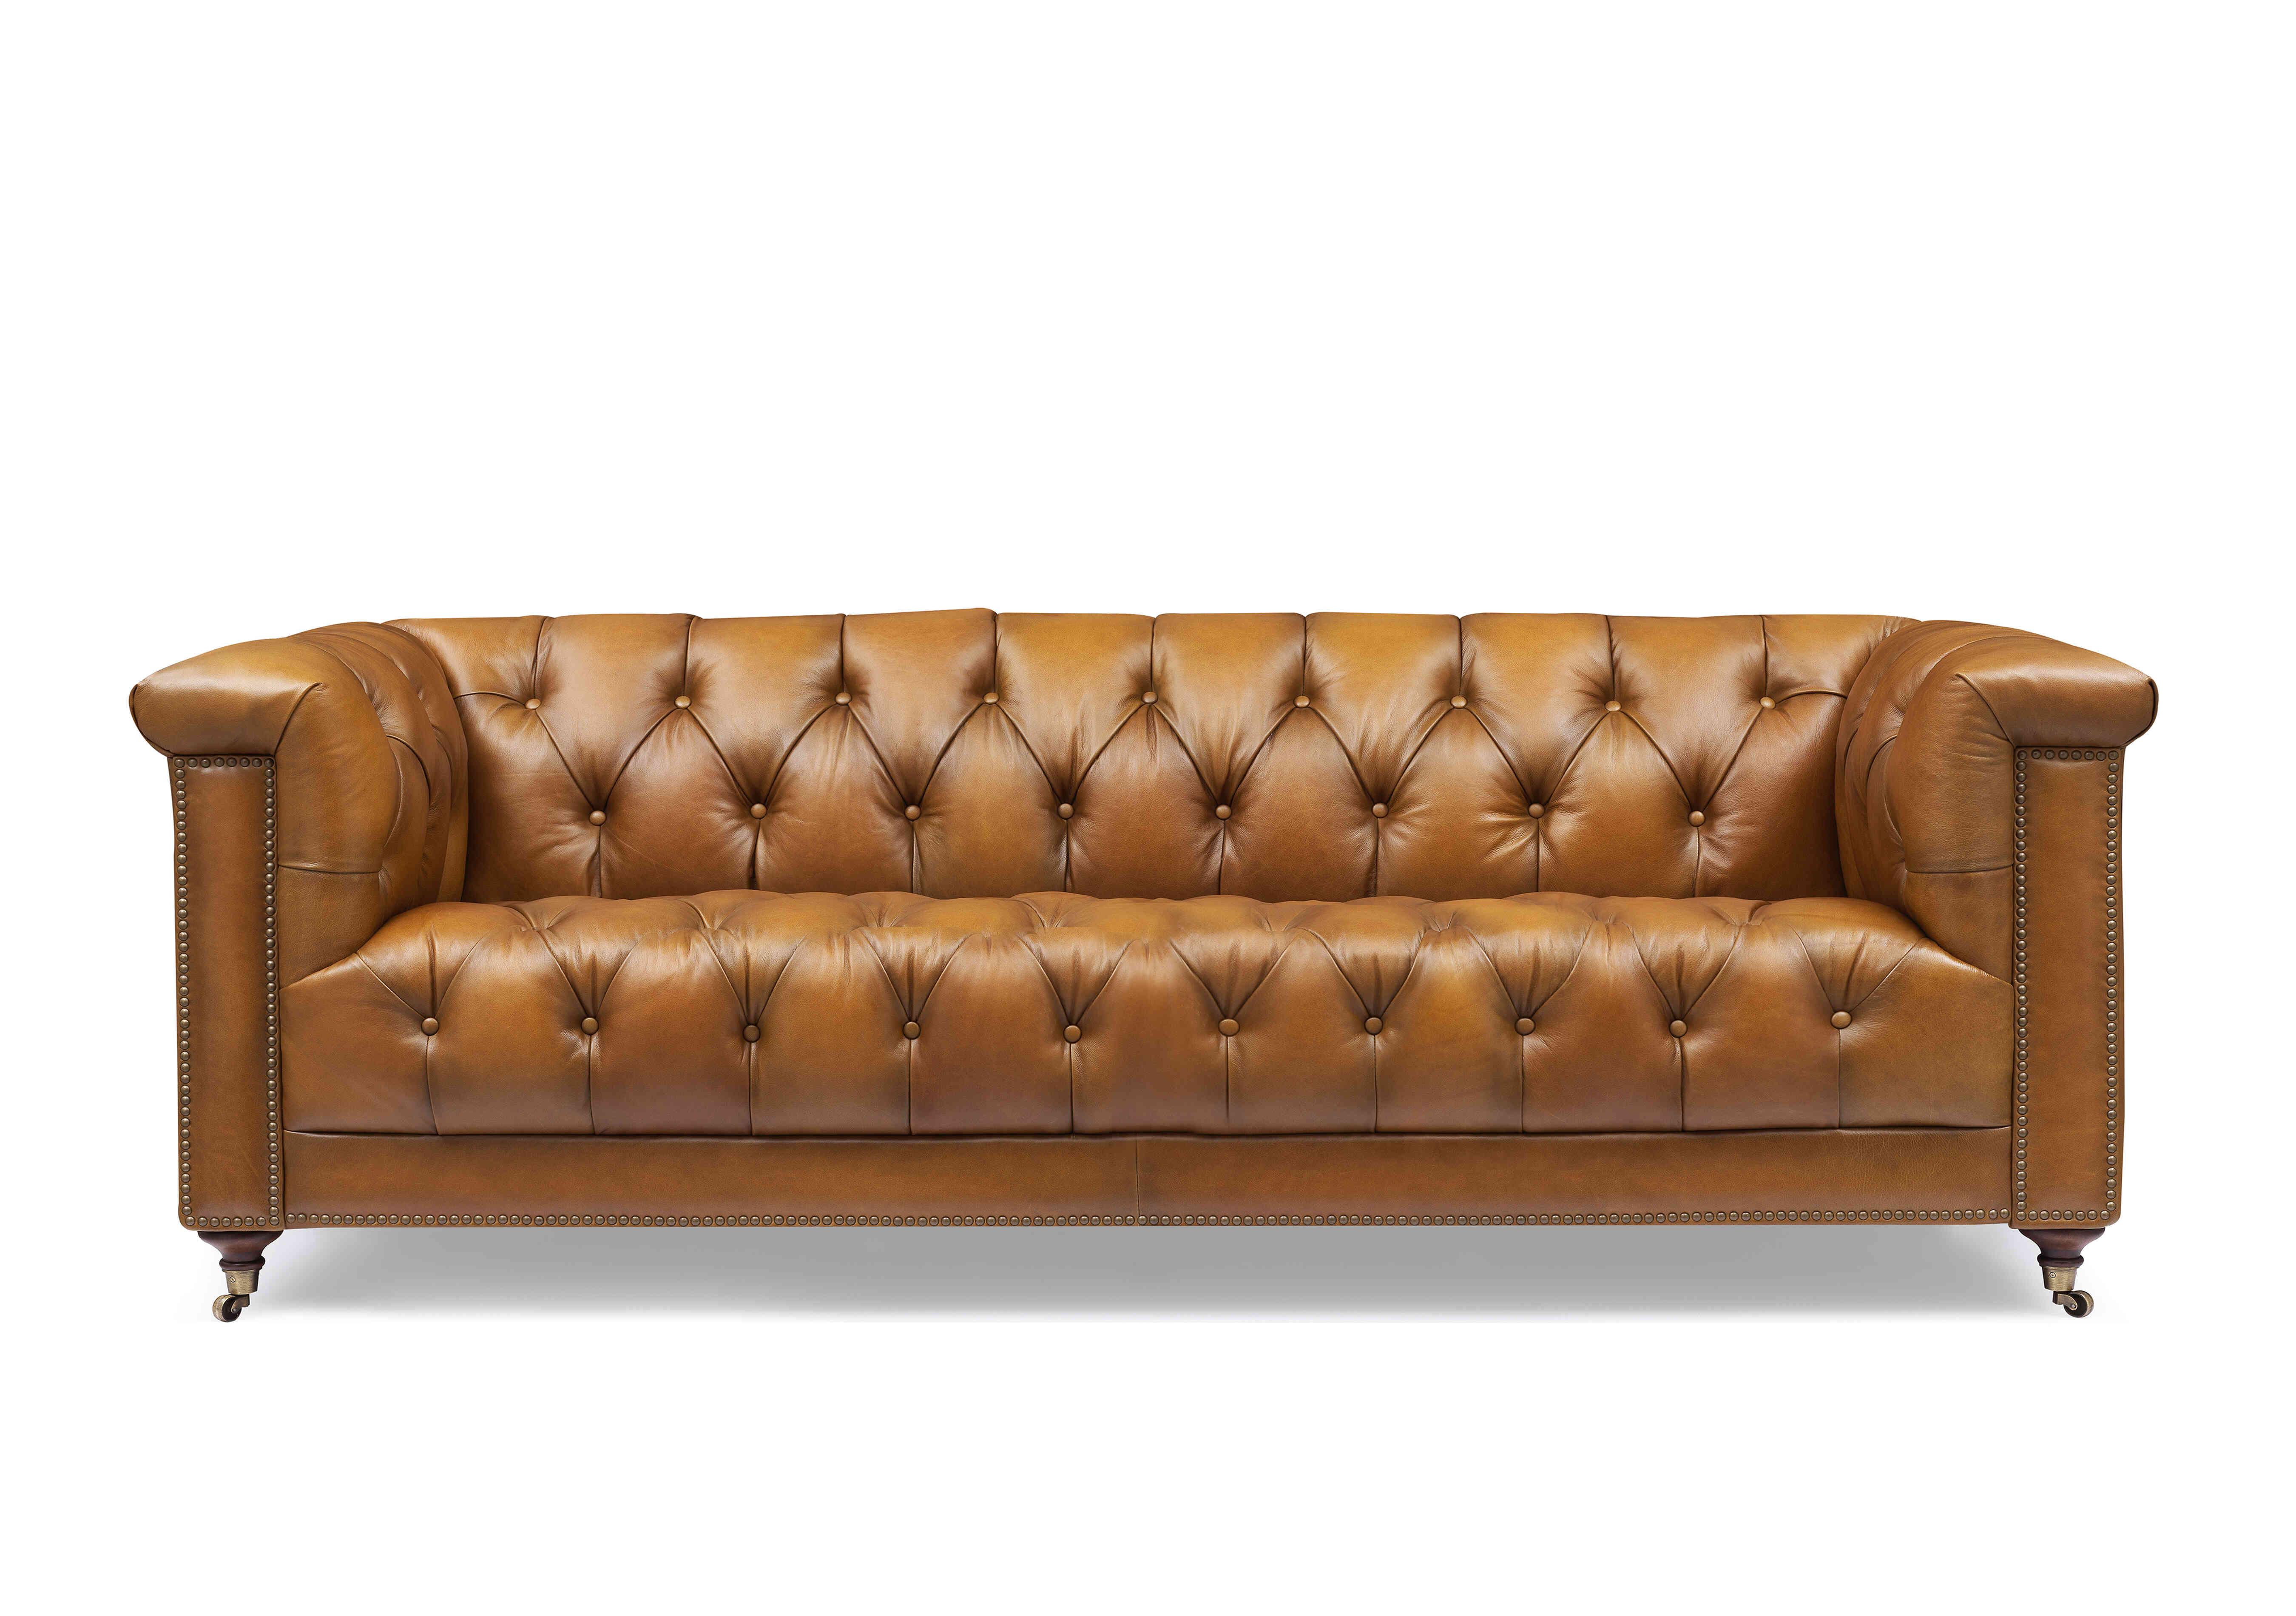 Wallace 4 Seater Leather Chesterfield Sofa with USB-C in X3y1-1957ls Inca on Furniture Village